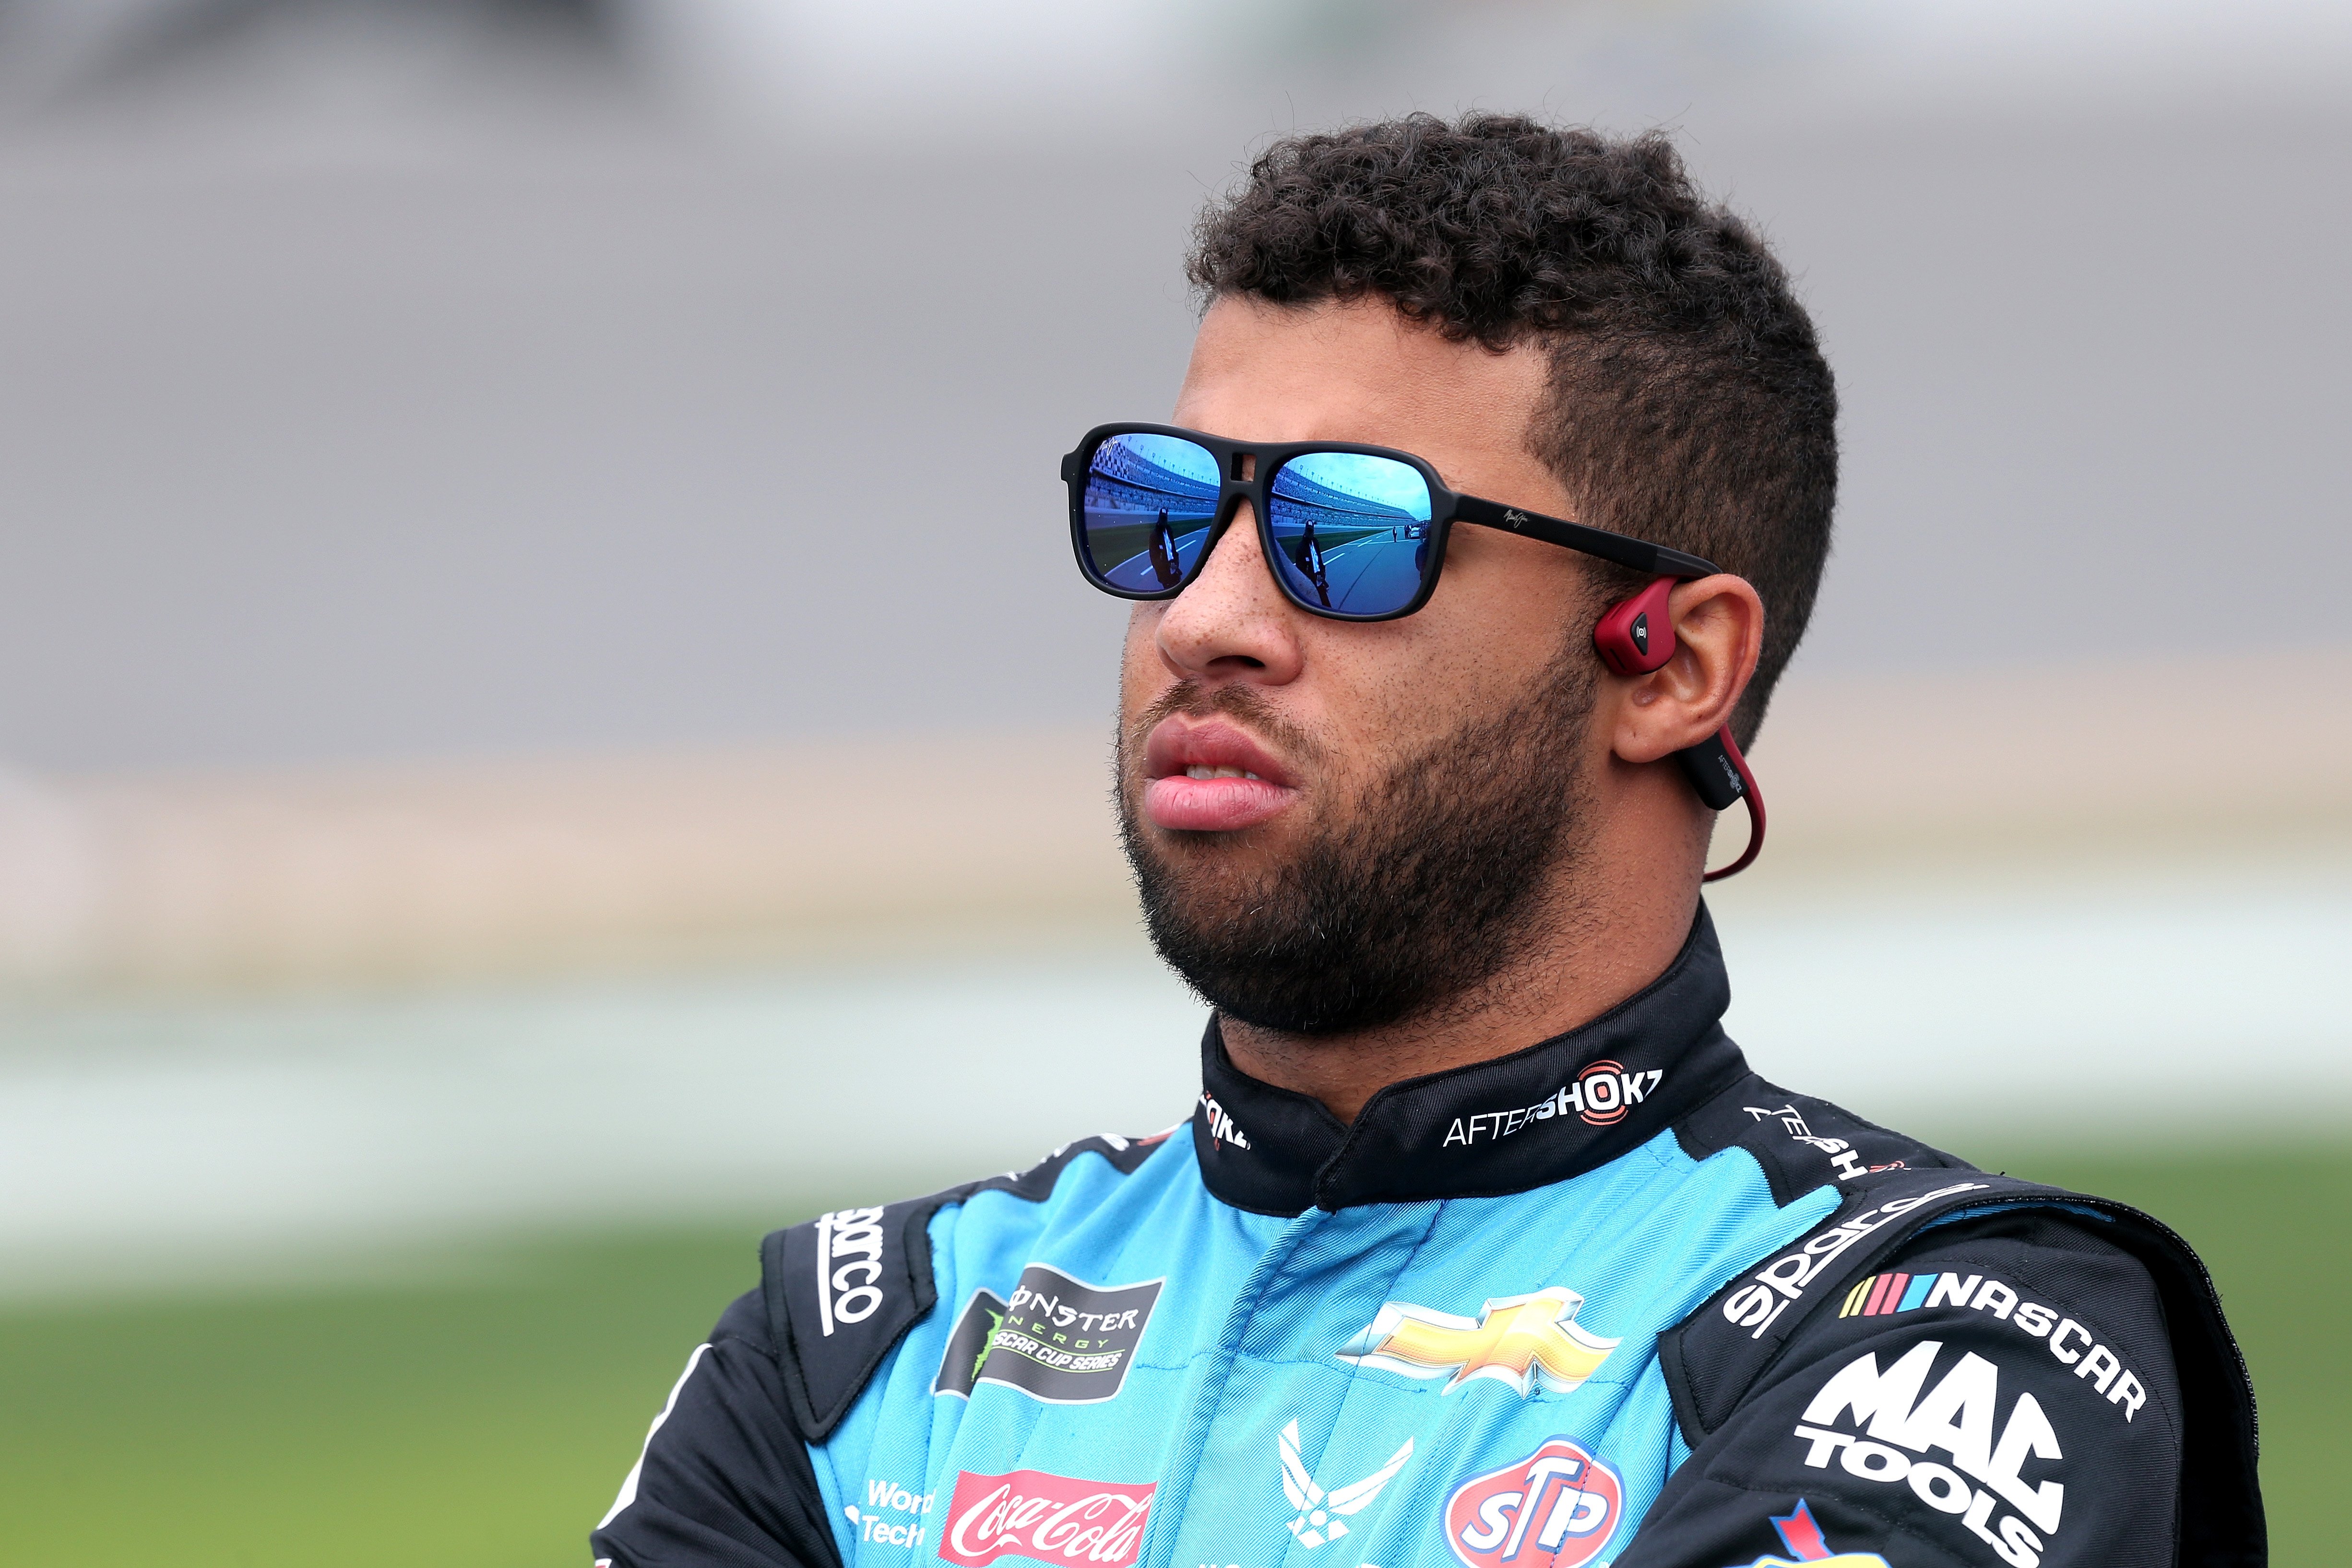 Bubba Wallace during qualifying for the NASCAR Cup Series 61st Annual Daytona 500 at Daytona International Speedway on February 10, 2019, in Daytona Beach, Florida. | Source: Getty Images.